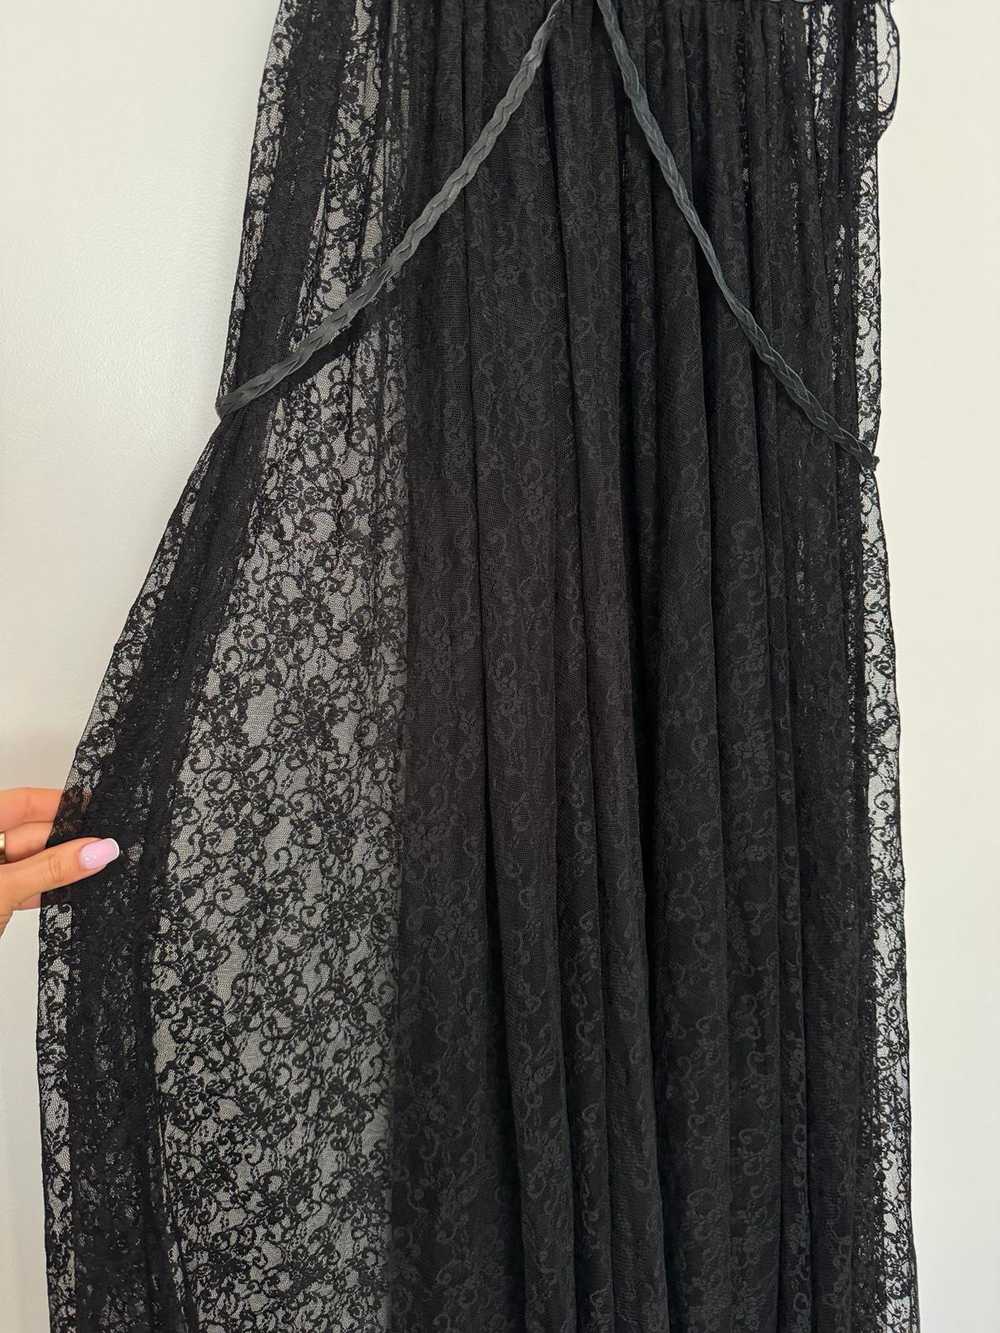 Product Details Black Sheer Lace Plunge Gown - image 5